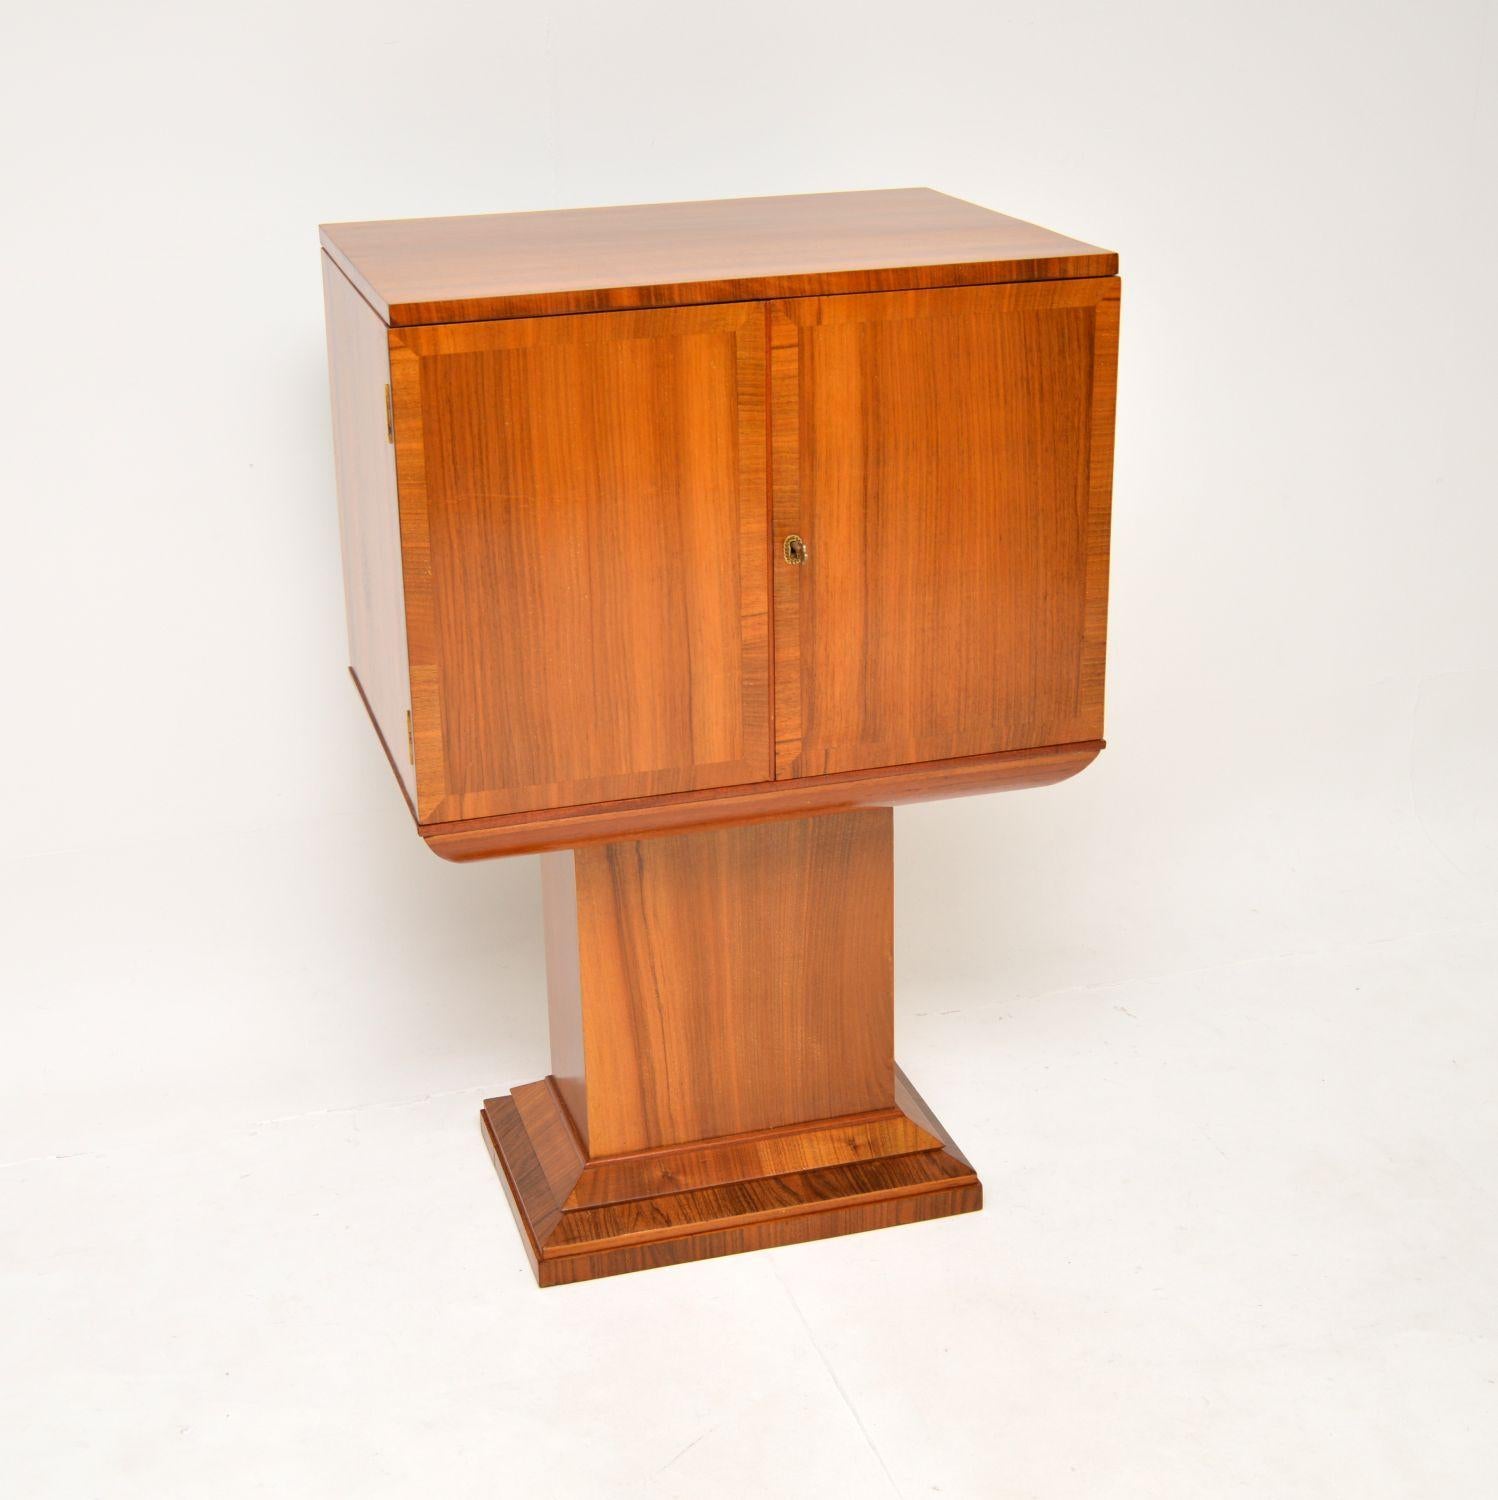 A stylish and extremely well made Art Deco drinks cabinet in walnut. This was made in England, it dates from around the 1920’s.

It is of superb quality and is a lovely, petite size. The mirrored interior is the perfect height for storing bottles,